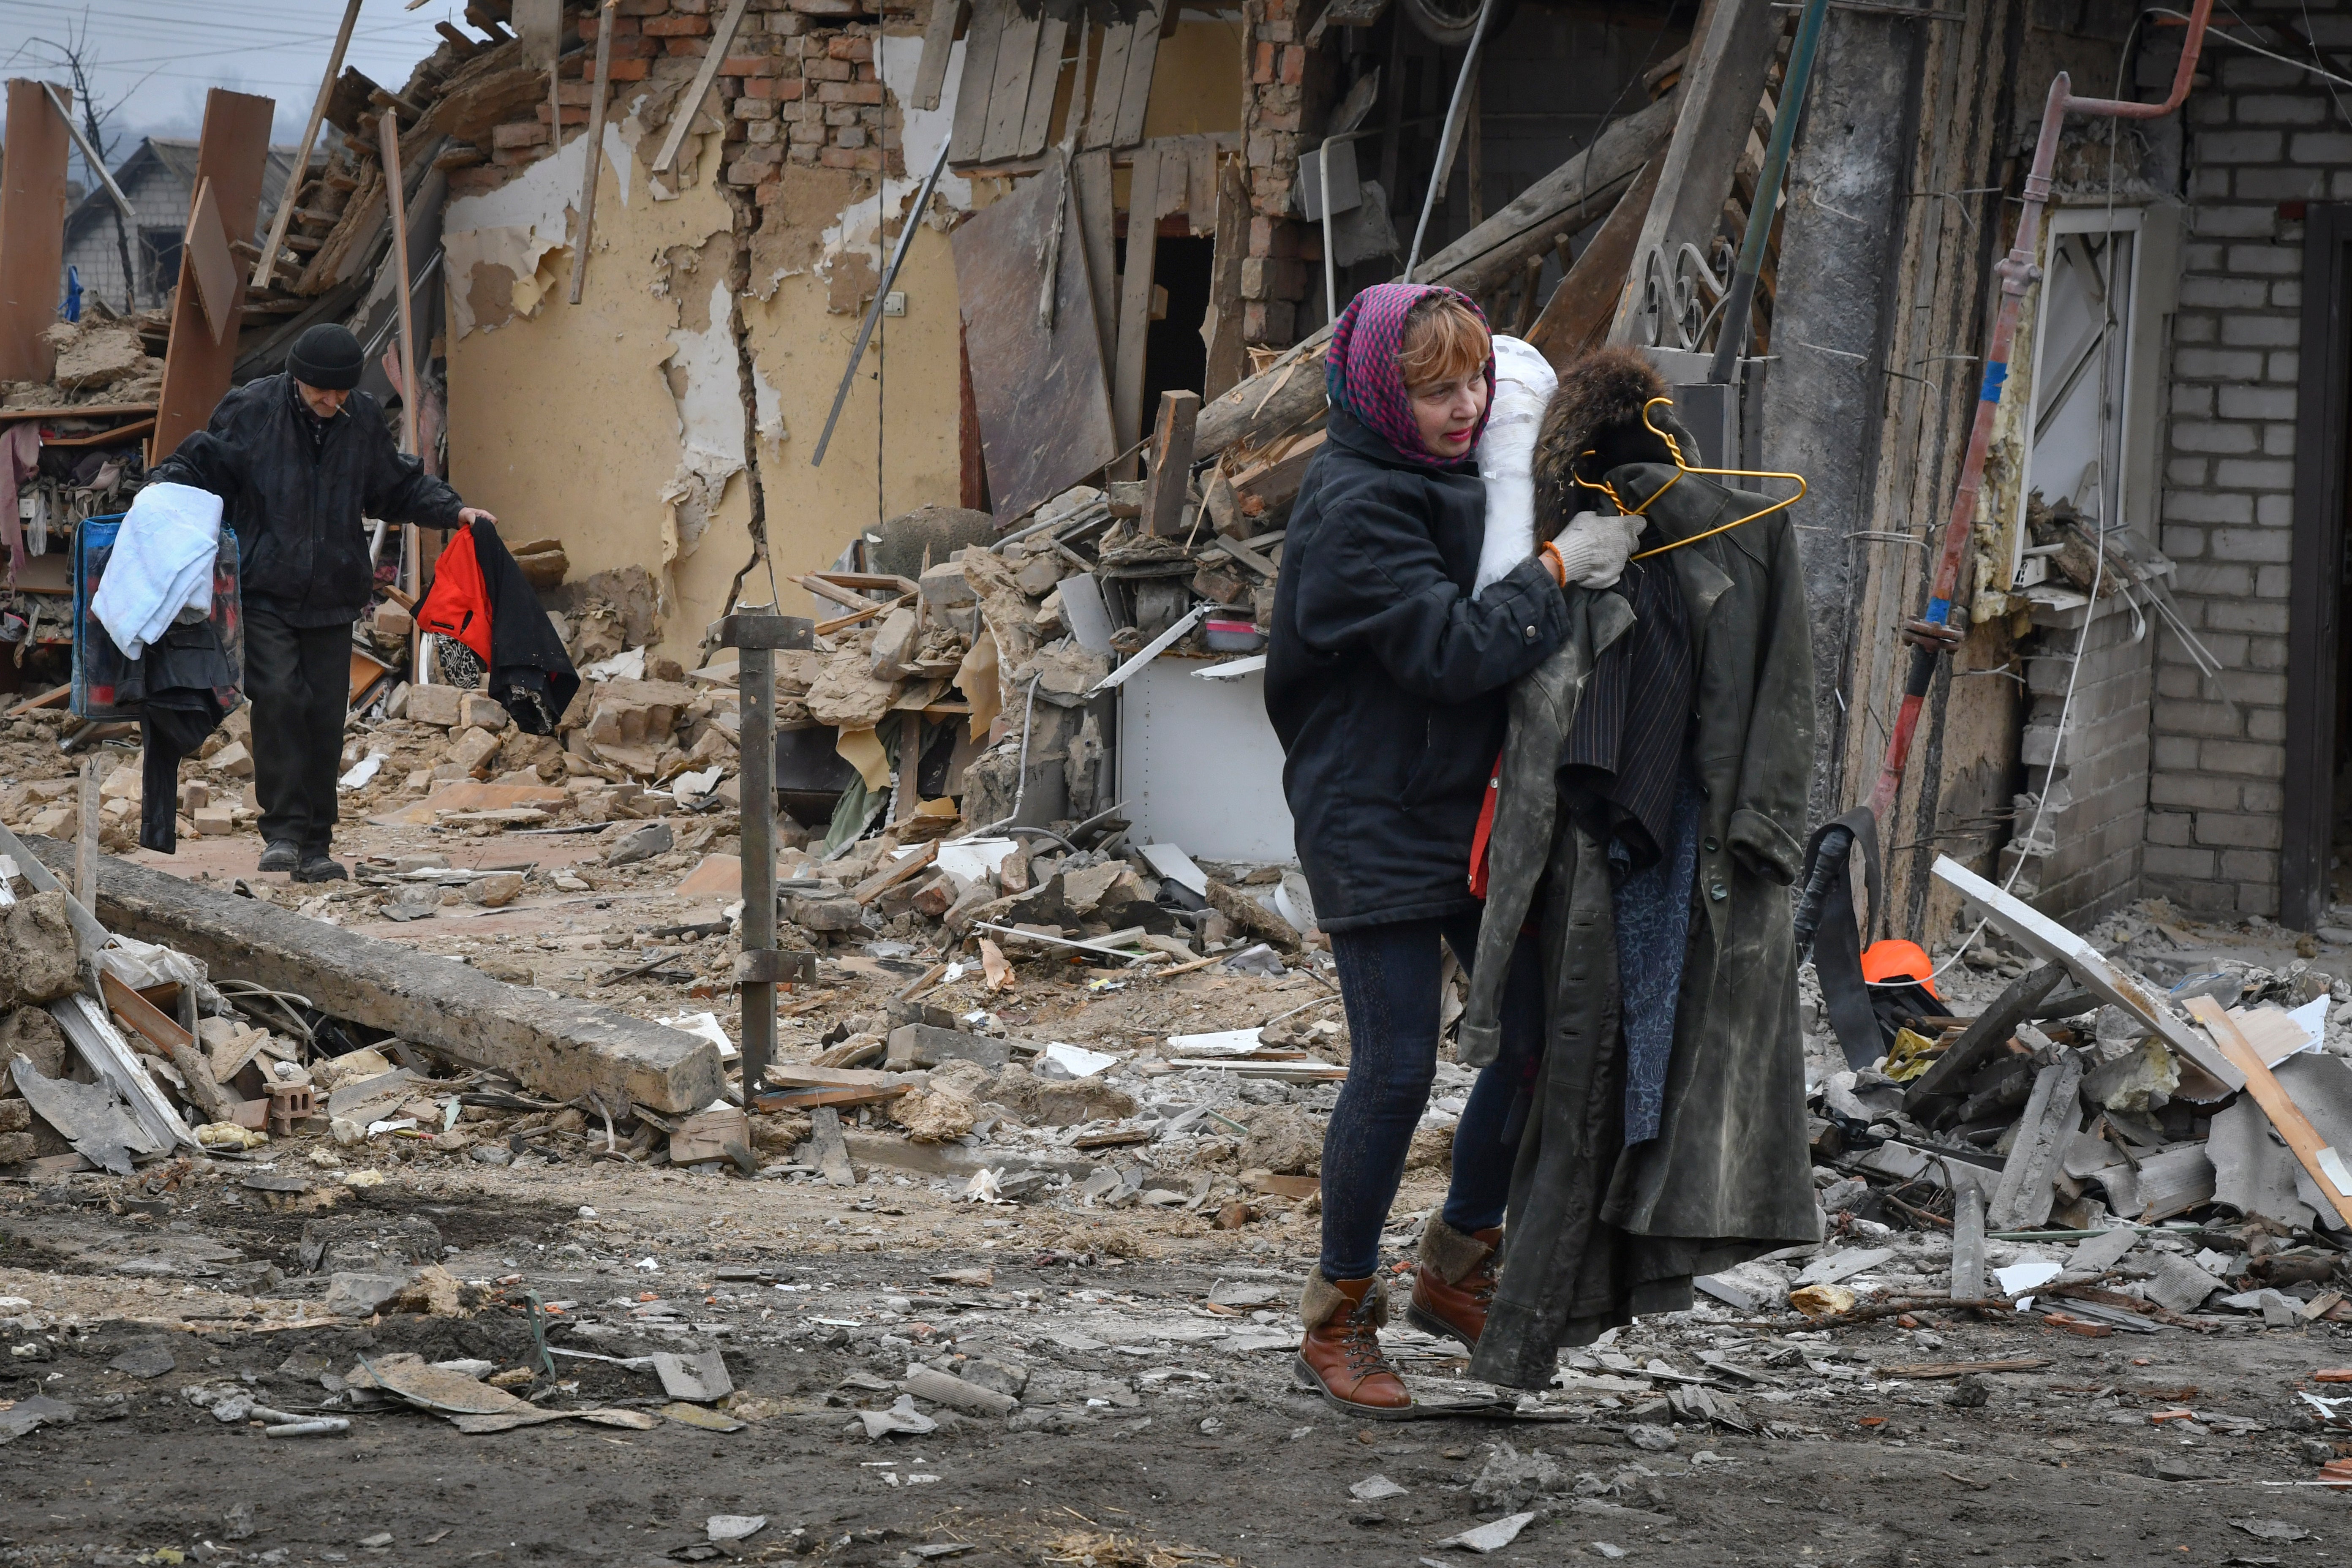 Zaporizhzhia residents carry their belongings as they leave homes devastated in Saturday’s rocket attacks